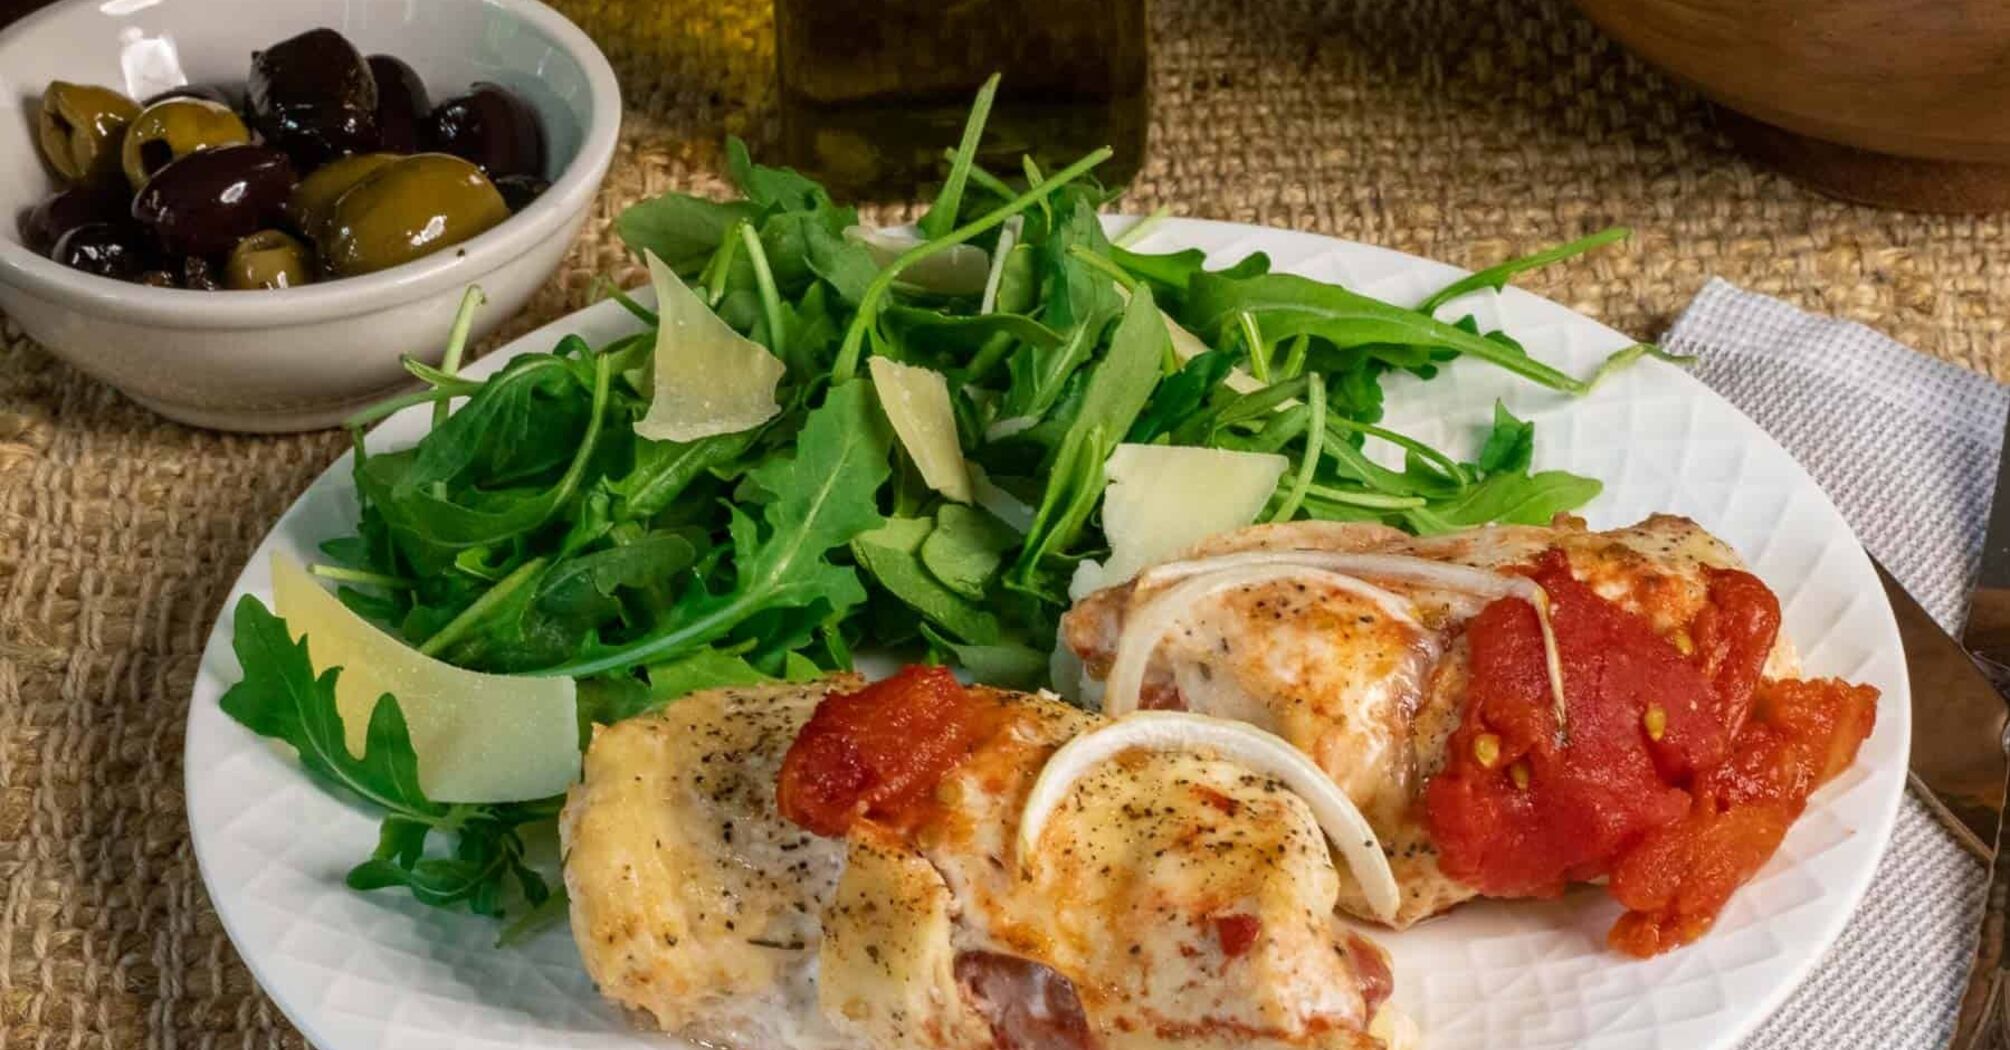 Chicken rolls with tomatoes and mozzarella